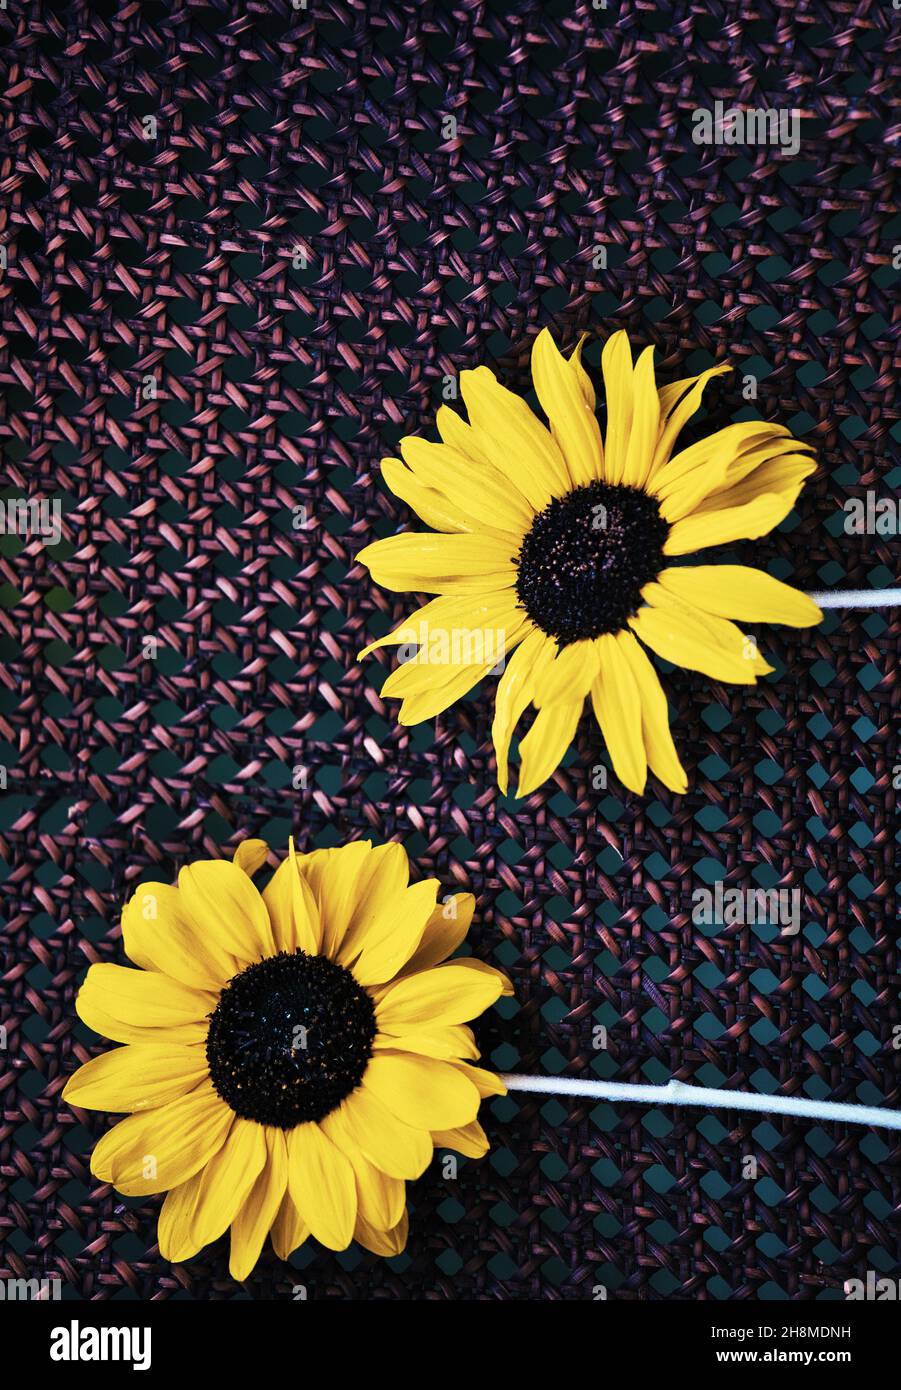 Two cut sunflowers against wicker woven background. Concept of togetherness, teamwork, friendship Stock Photo